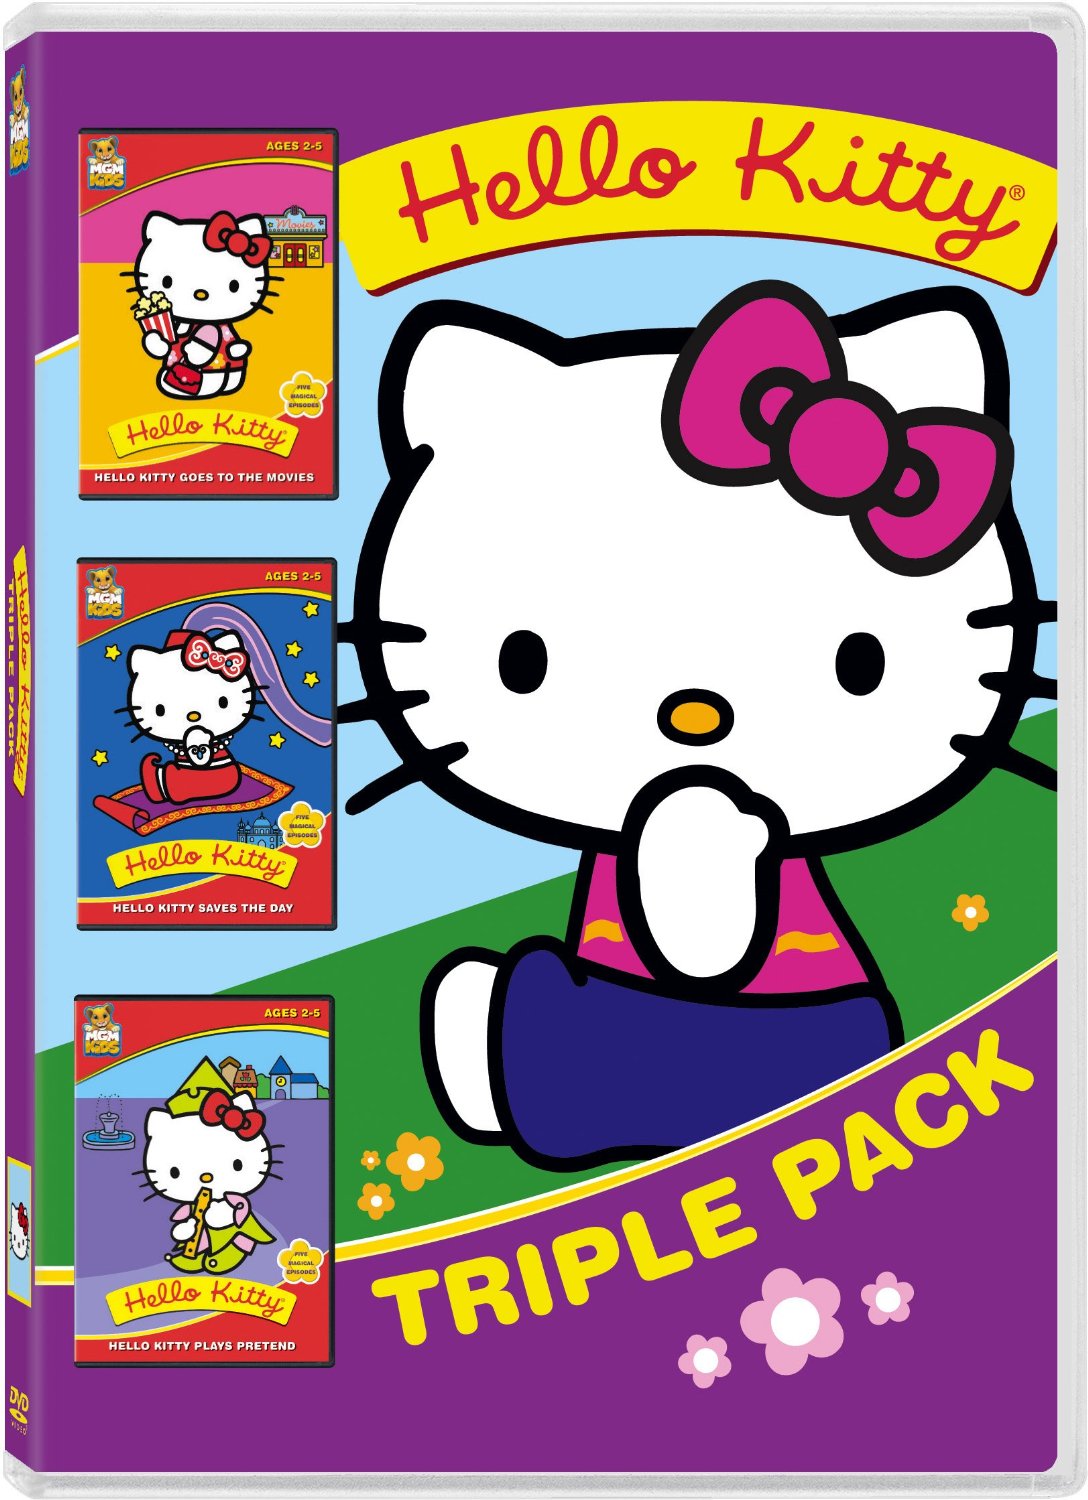 Hello Kitty Triple DVD Pack Only $5.48 – 73% Savings